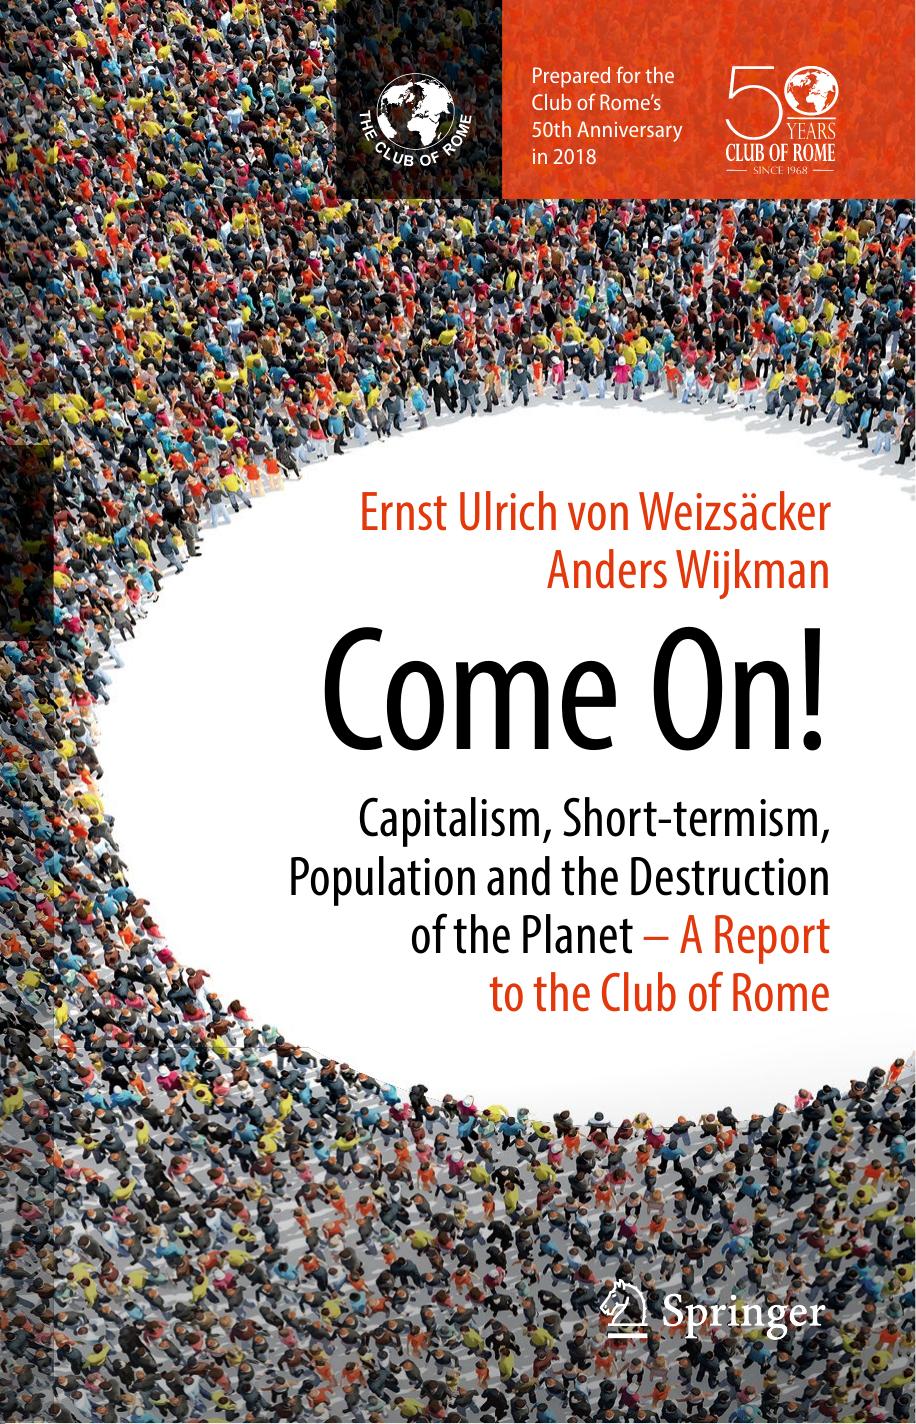 Come On!: Capitalism, Short-Termism, Population and the Destruction of the Planet